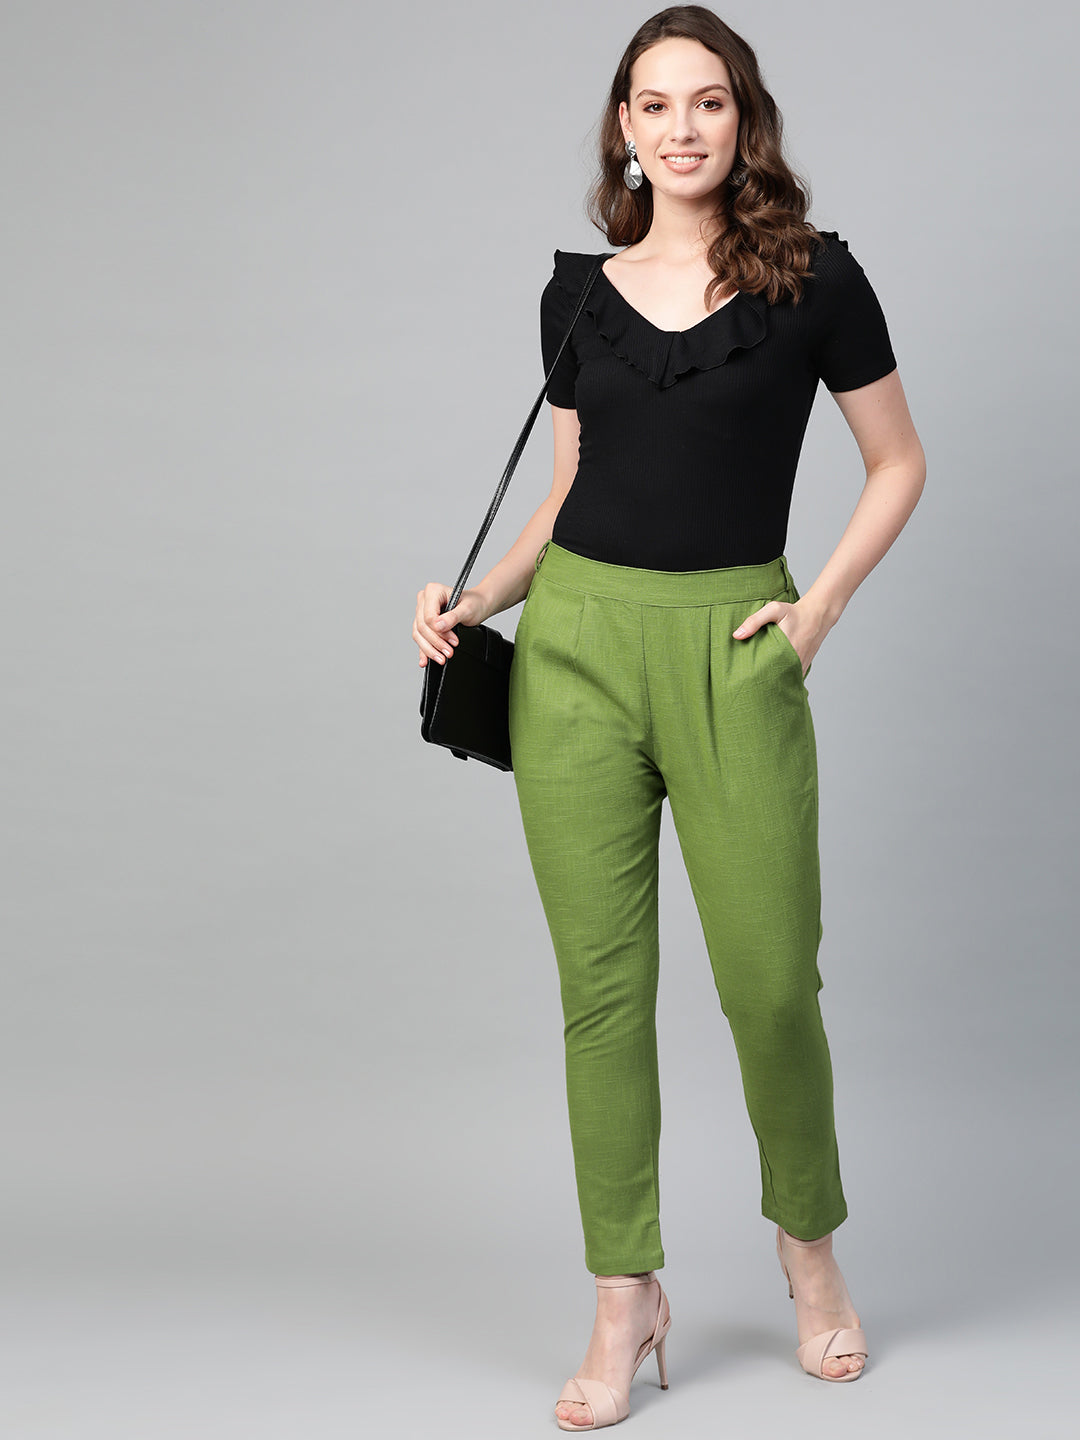 Cotton Slub Solid Regular Fit Casual OffWhite Trouser Pants  Yash Gallery